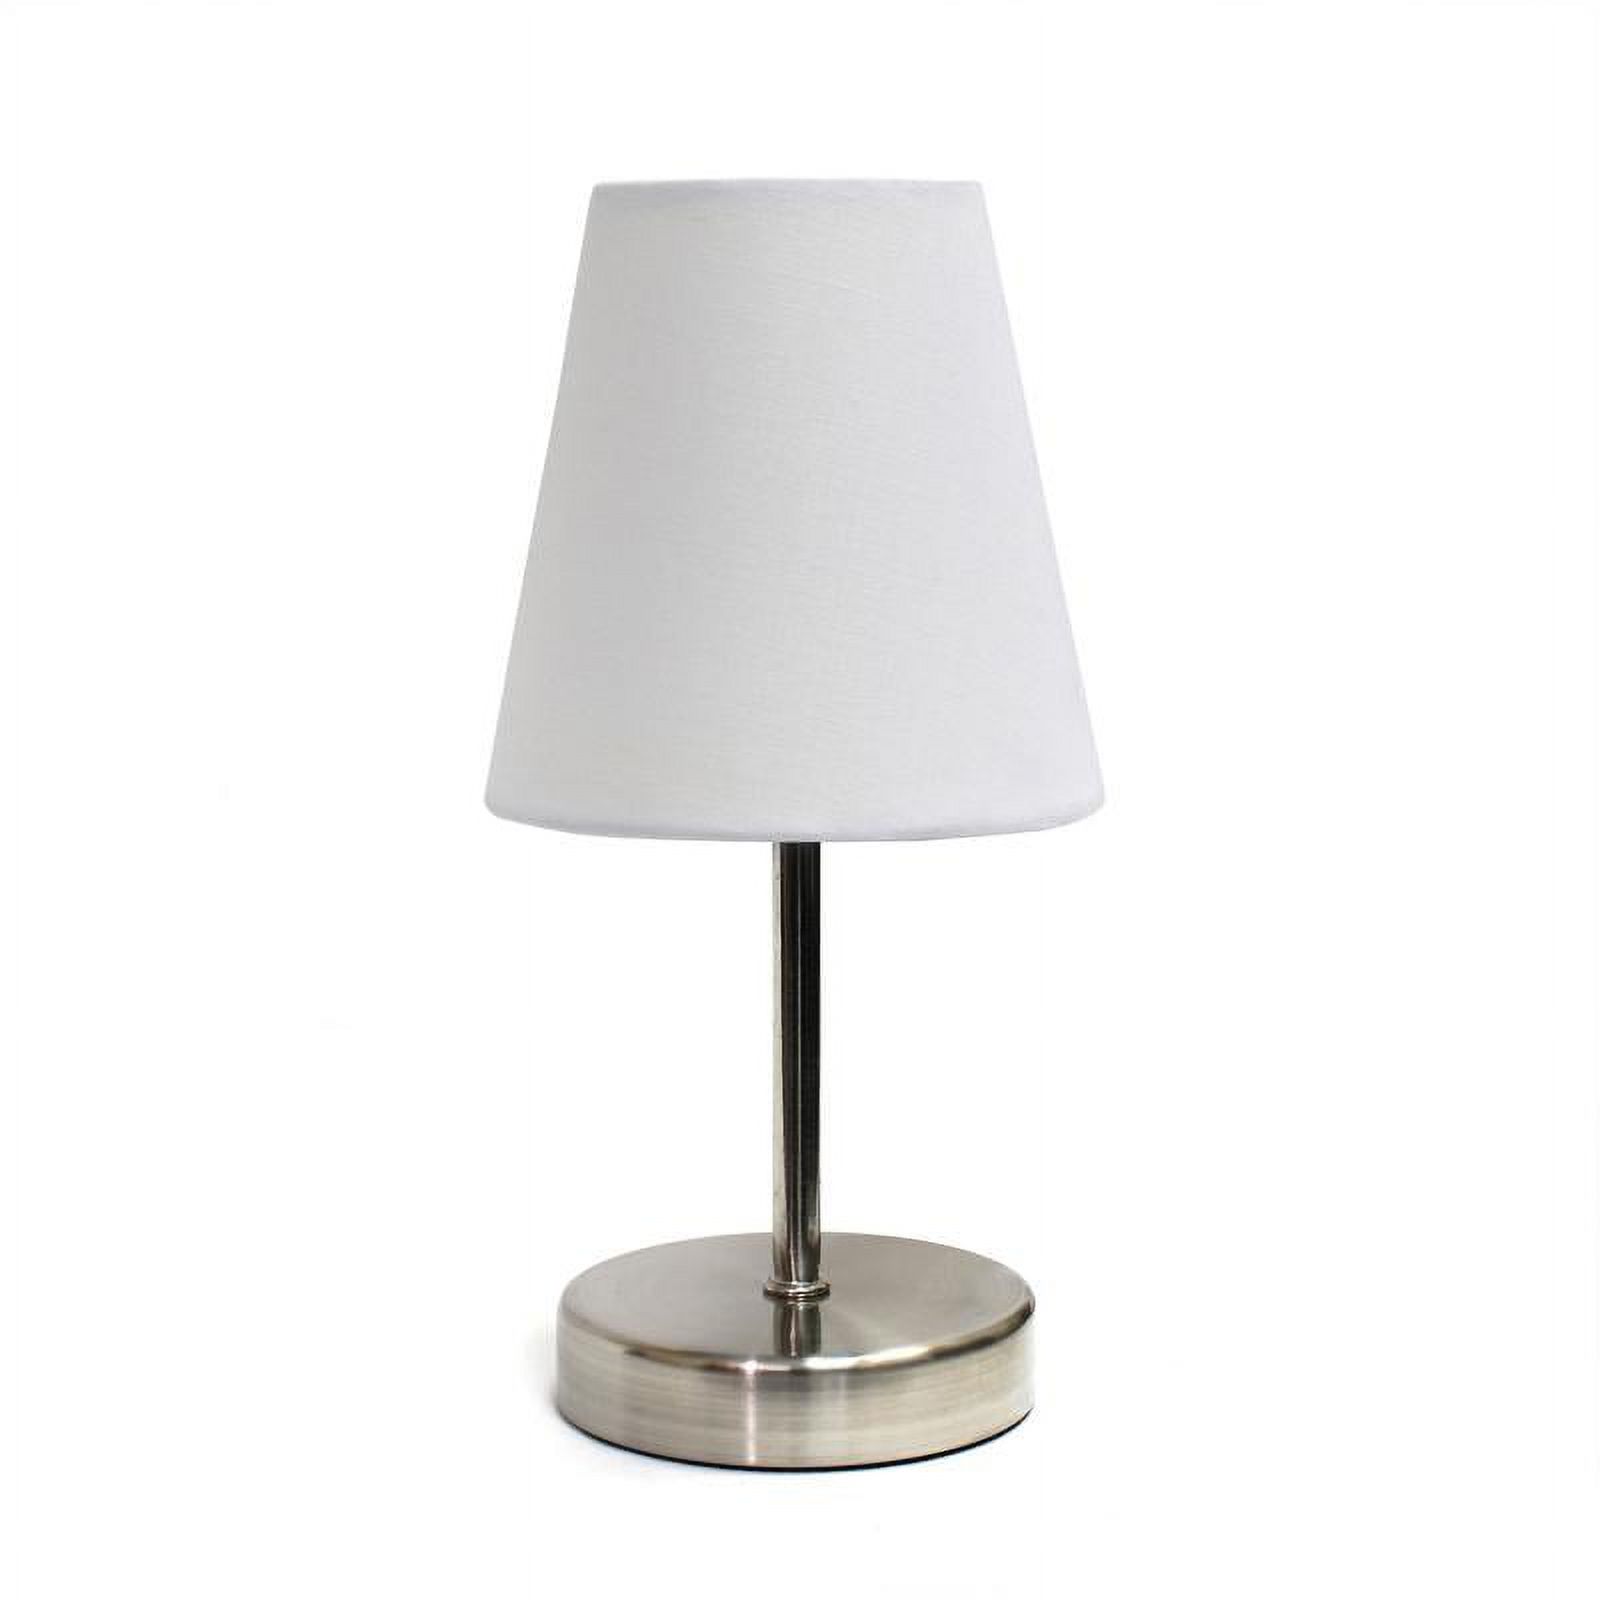 Simple Designs Sand Nickel Mini Basic Table Lamp with Fabric Shade - image 1 of 3